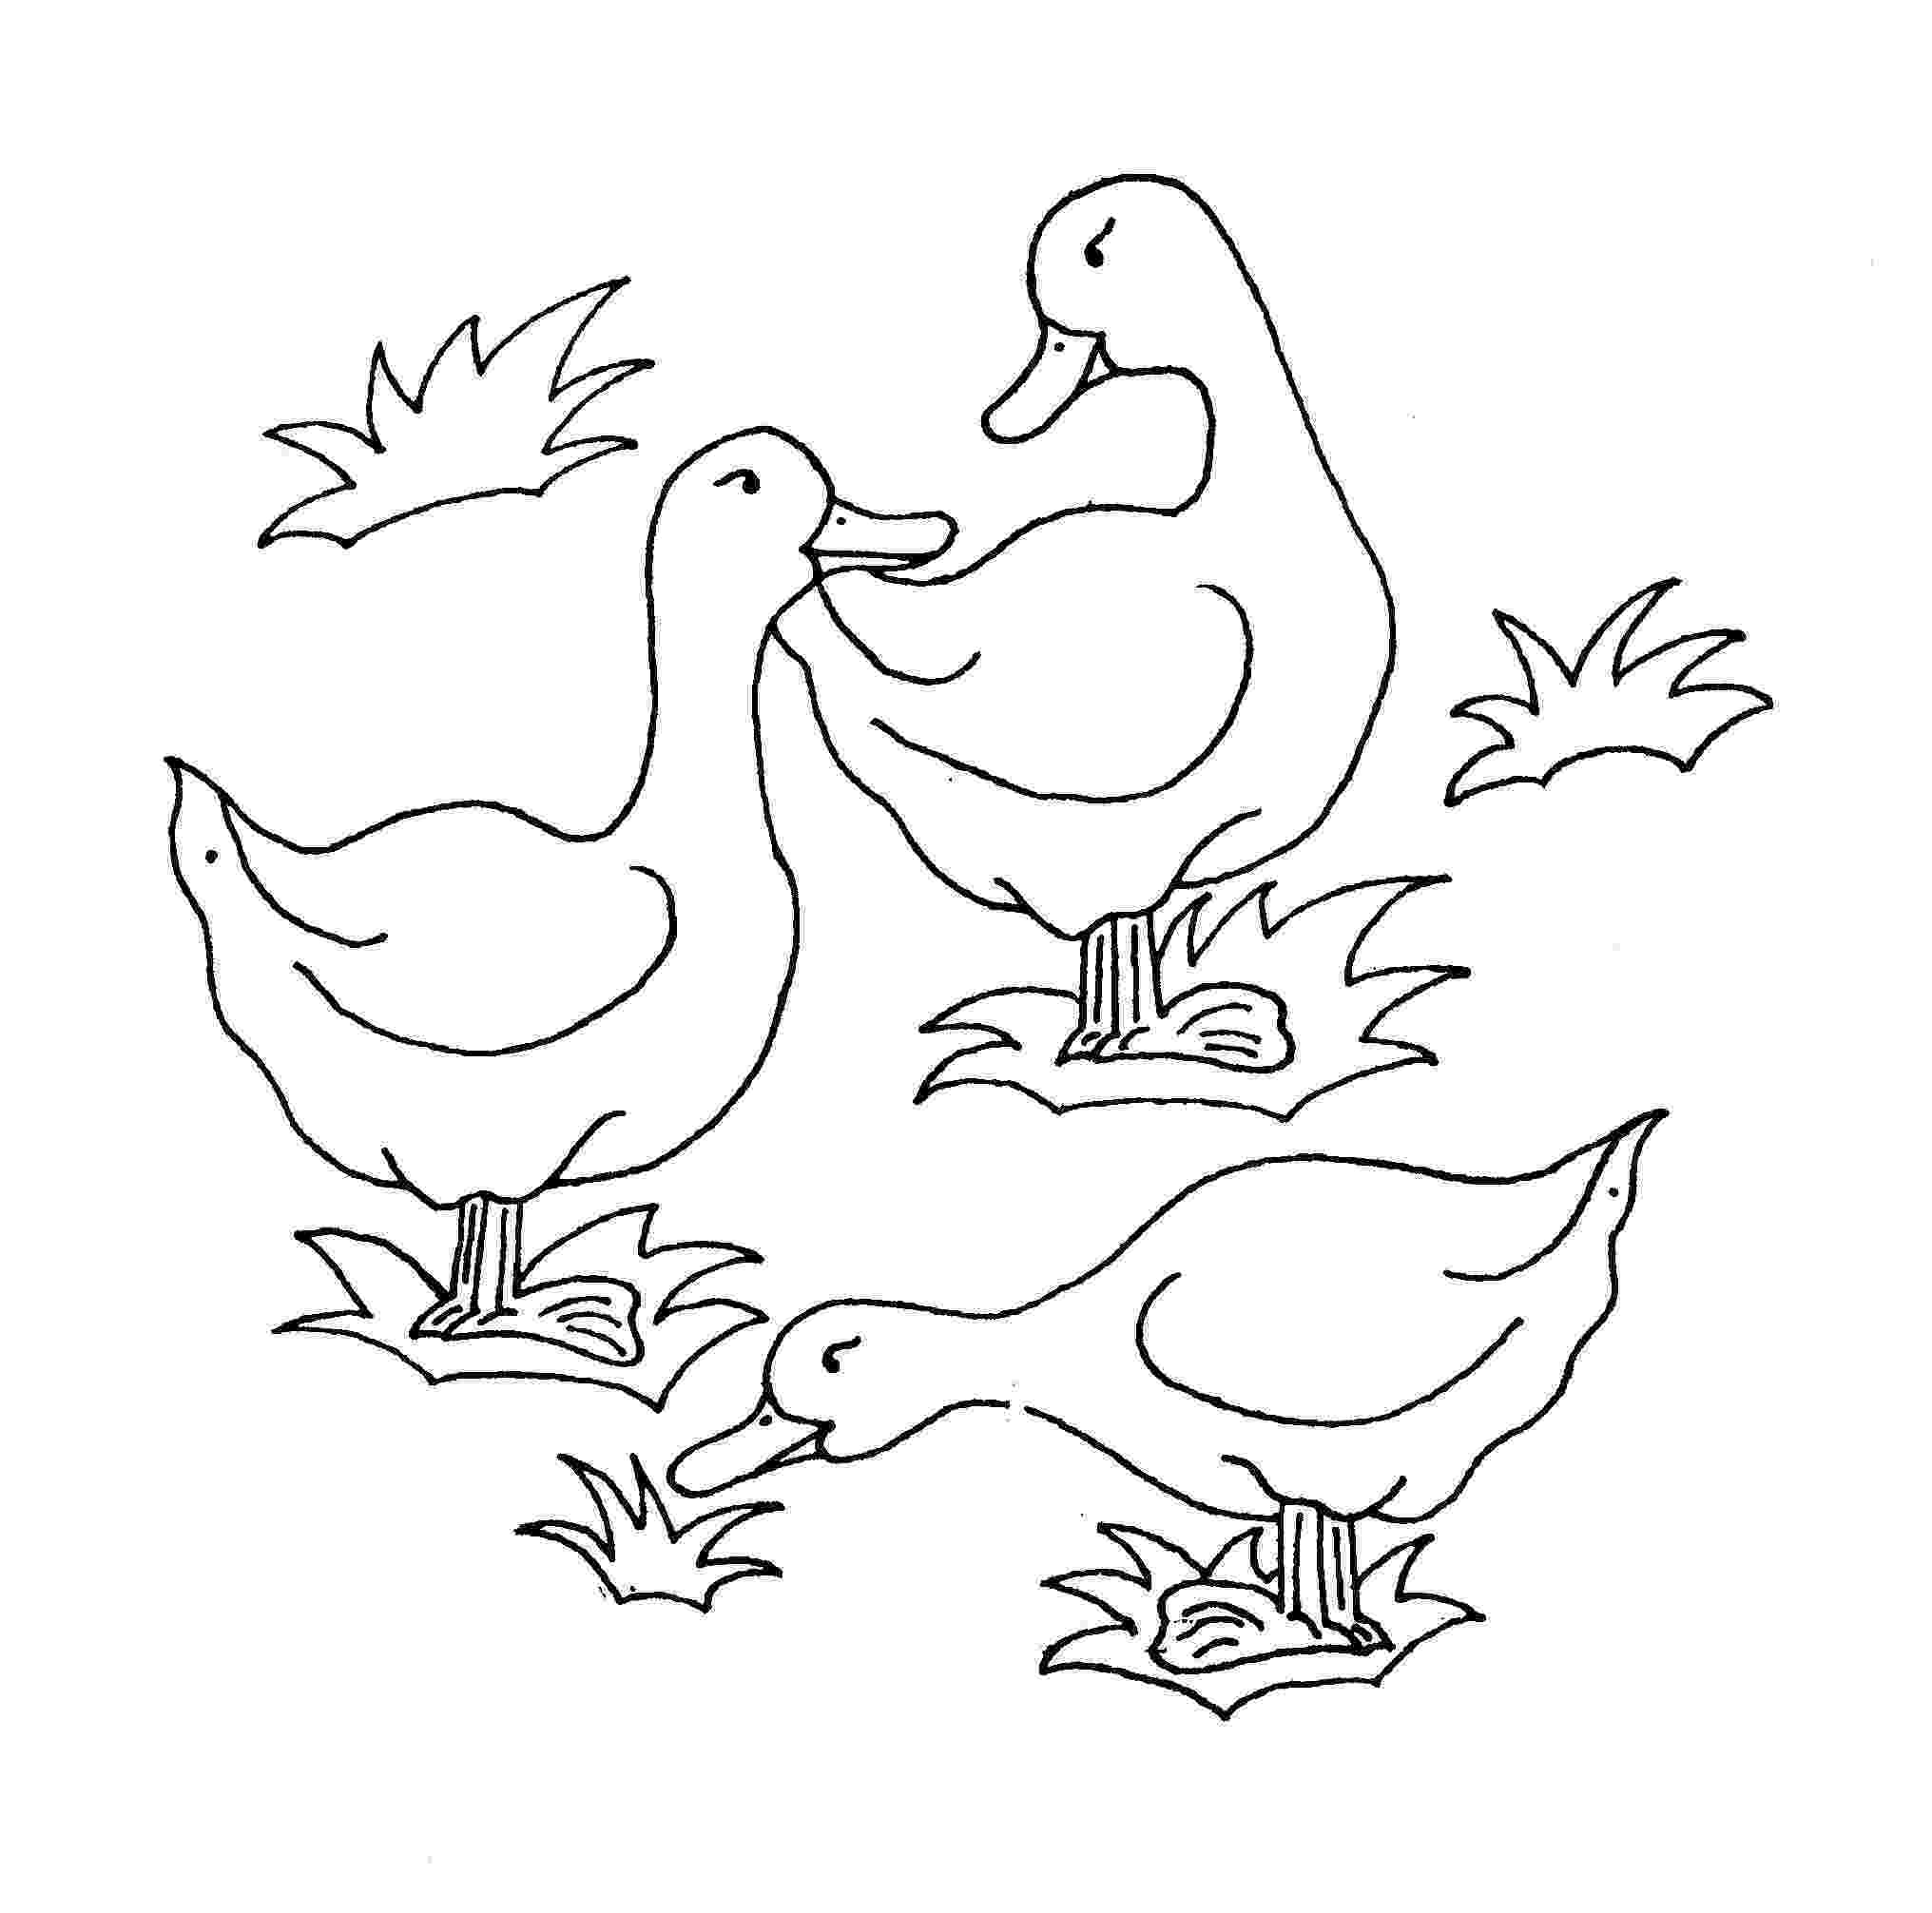 duck coloring sheet free printable duck coloring pages for kids animal place sheet duck coloring 